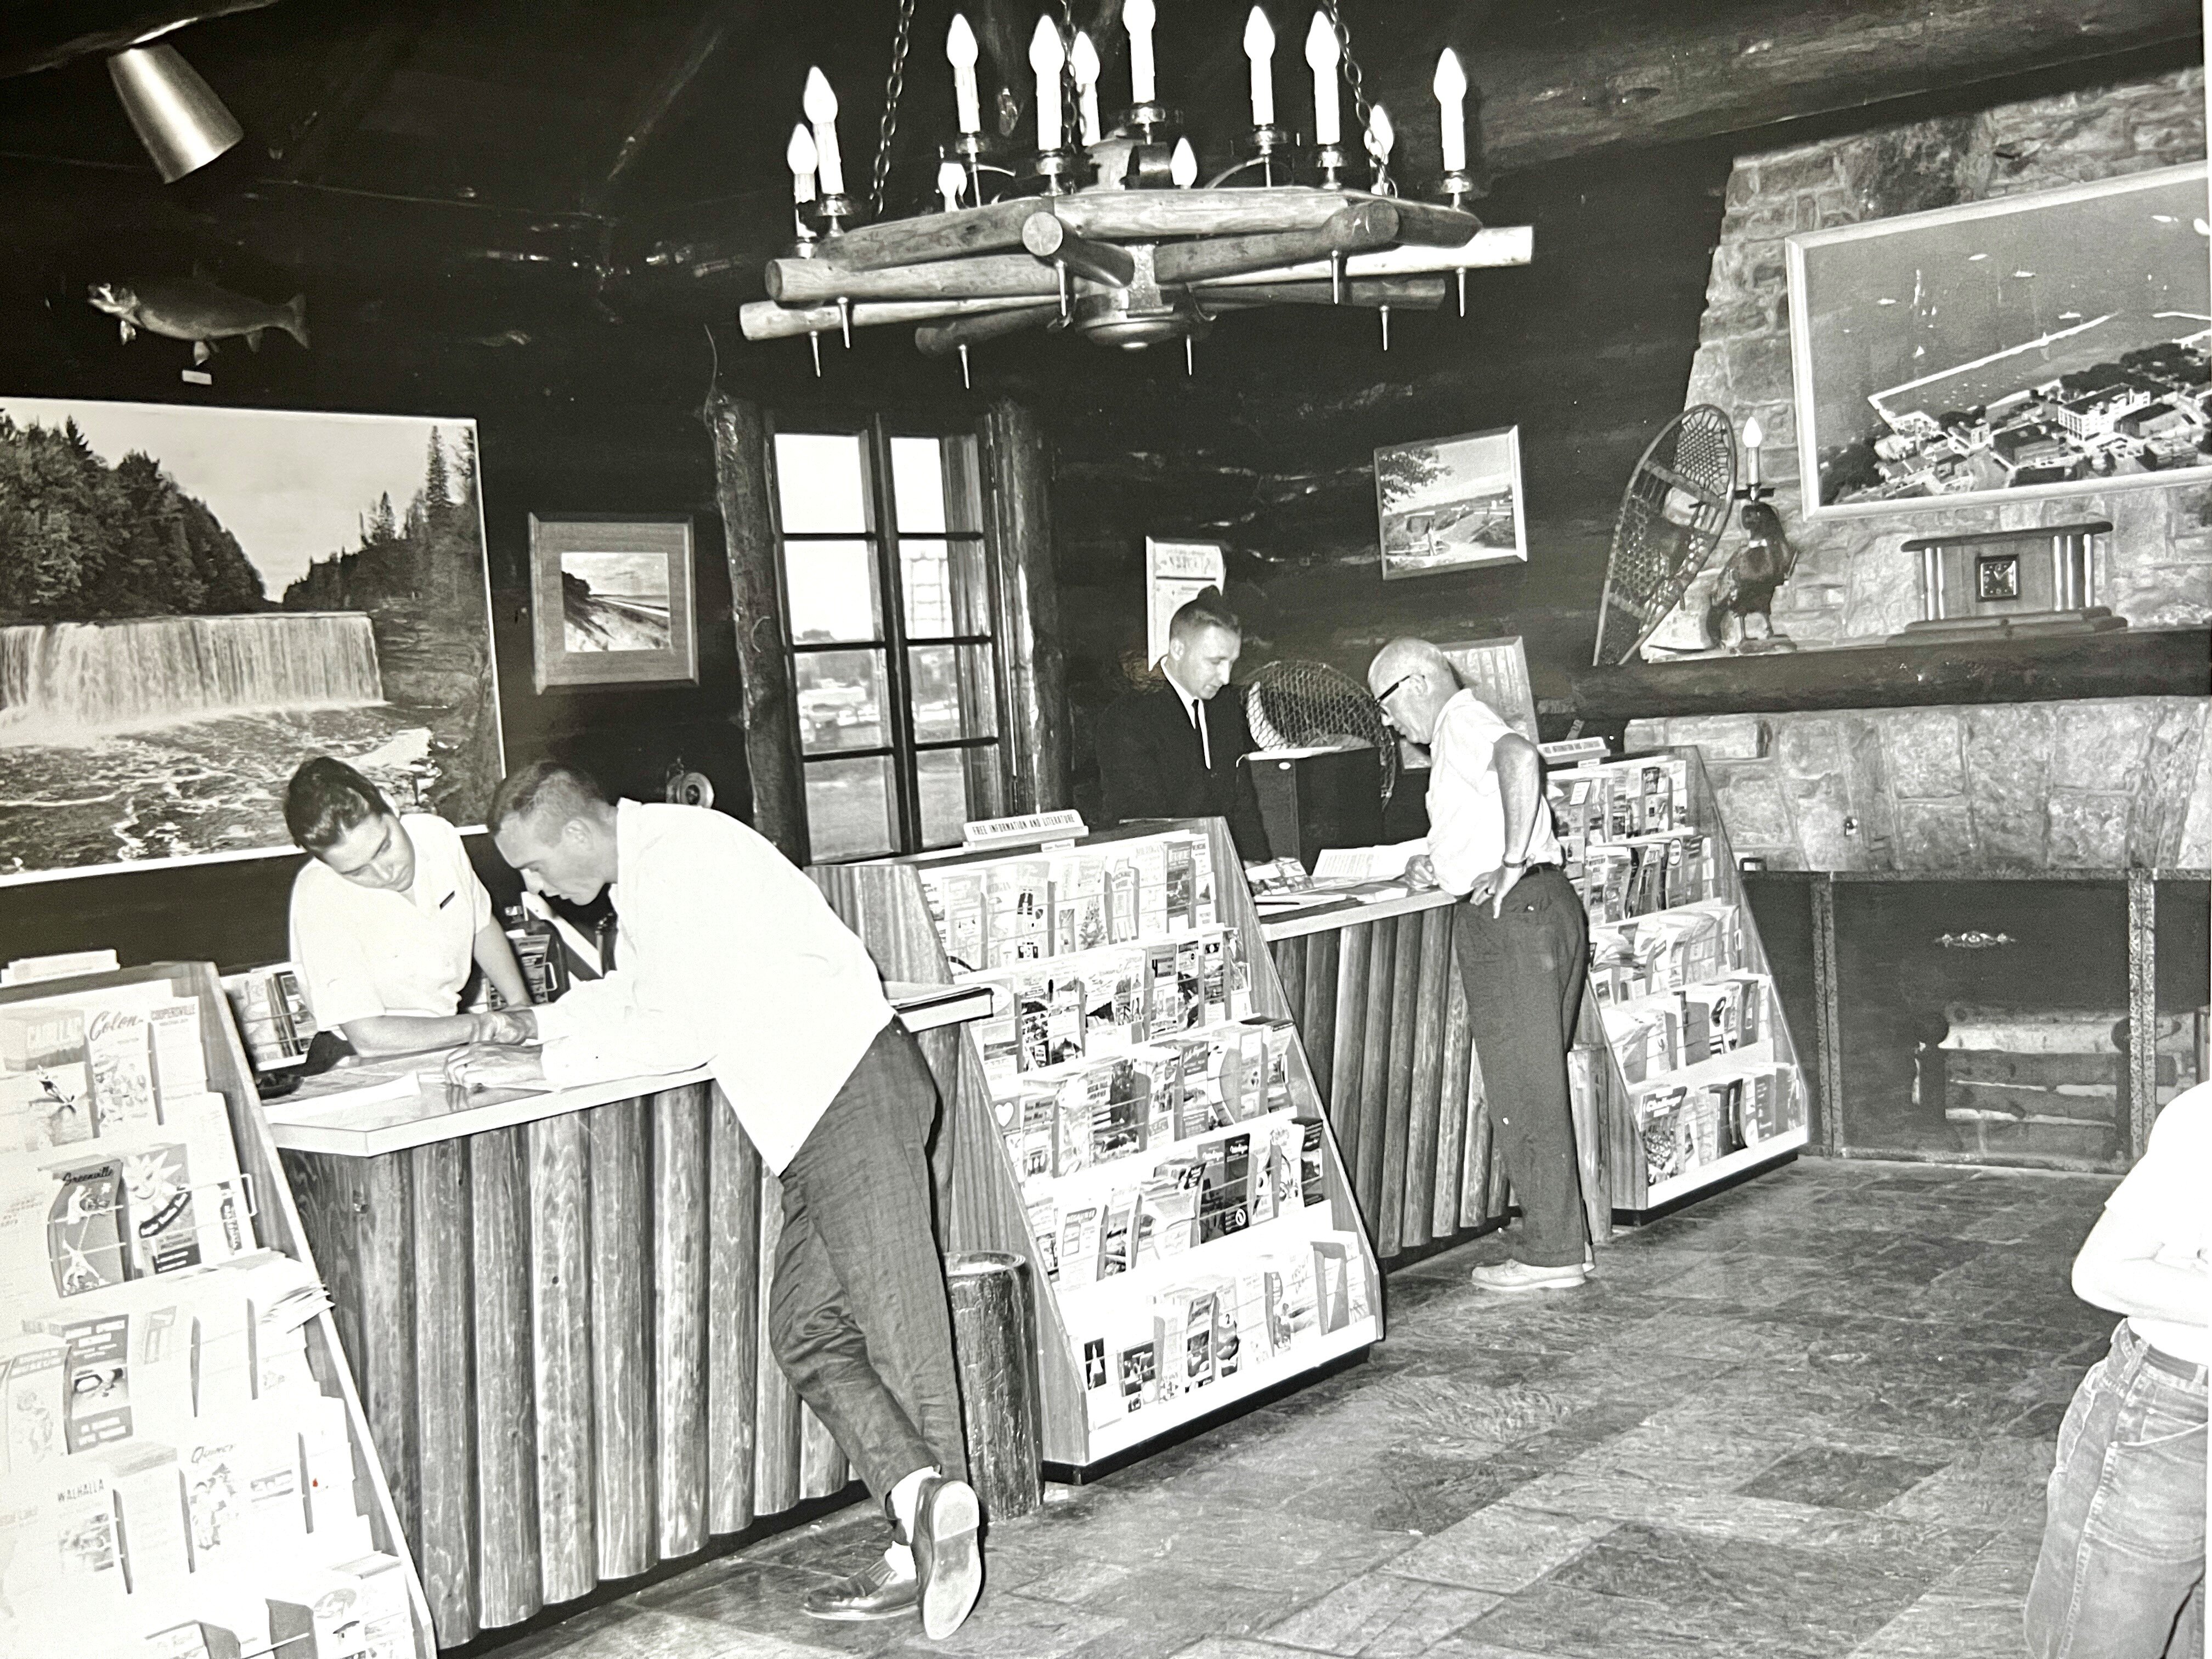 The old front desk at the original Menominee Tourist Lodge.